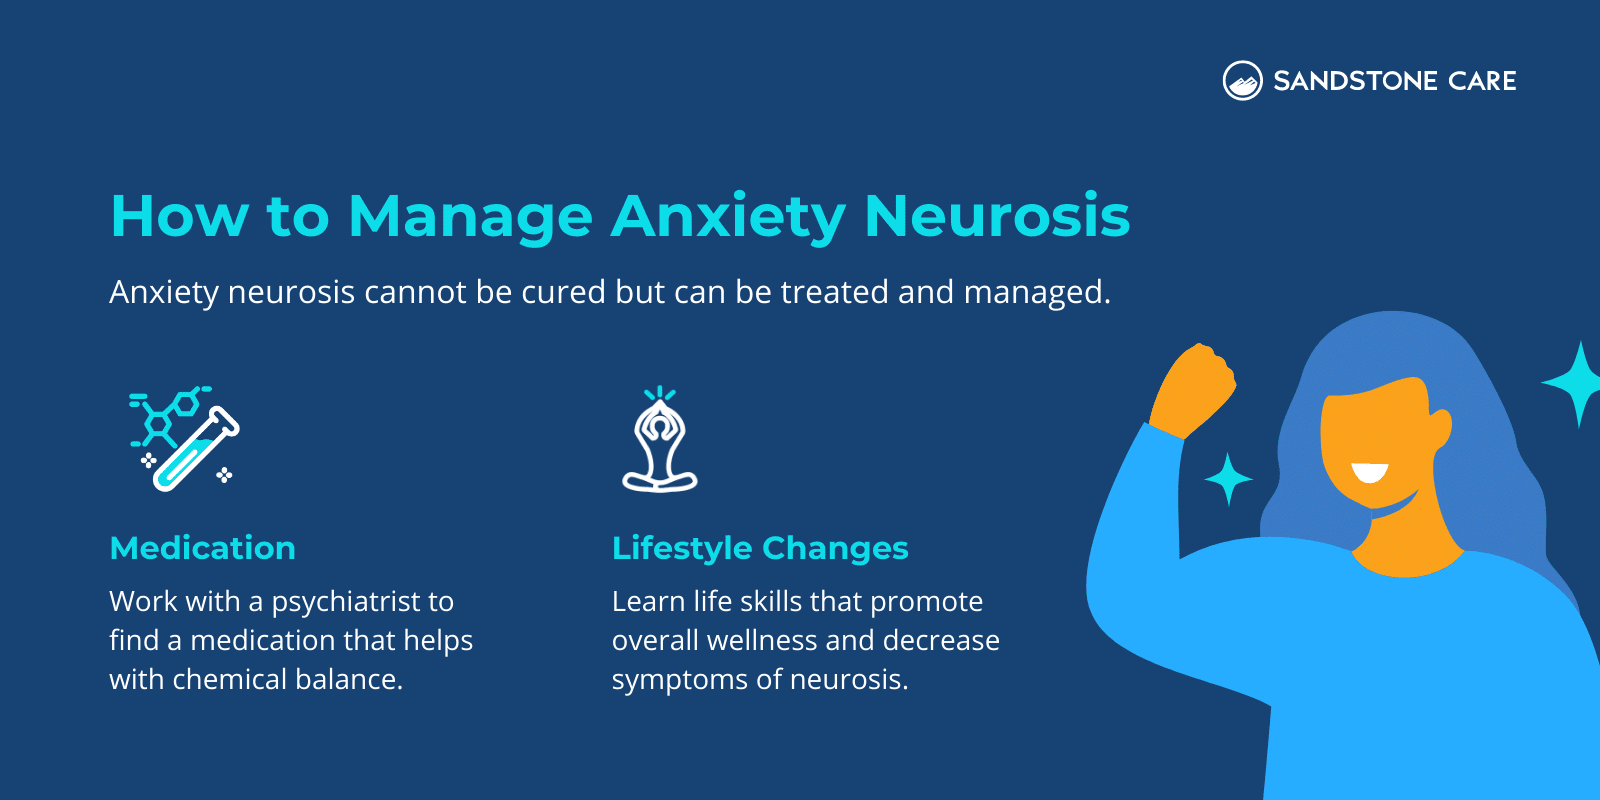 "How To Manage Anxiety Neurosis" written above 2 different ways illustrated with relevant icons next to a woman figure feeling empowered